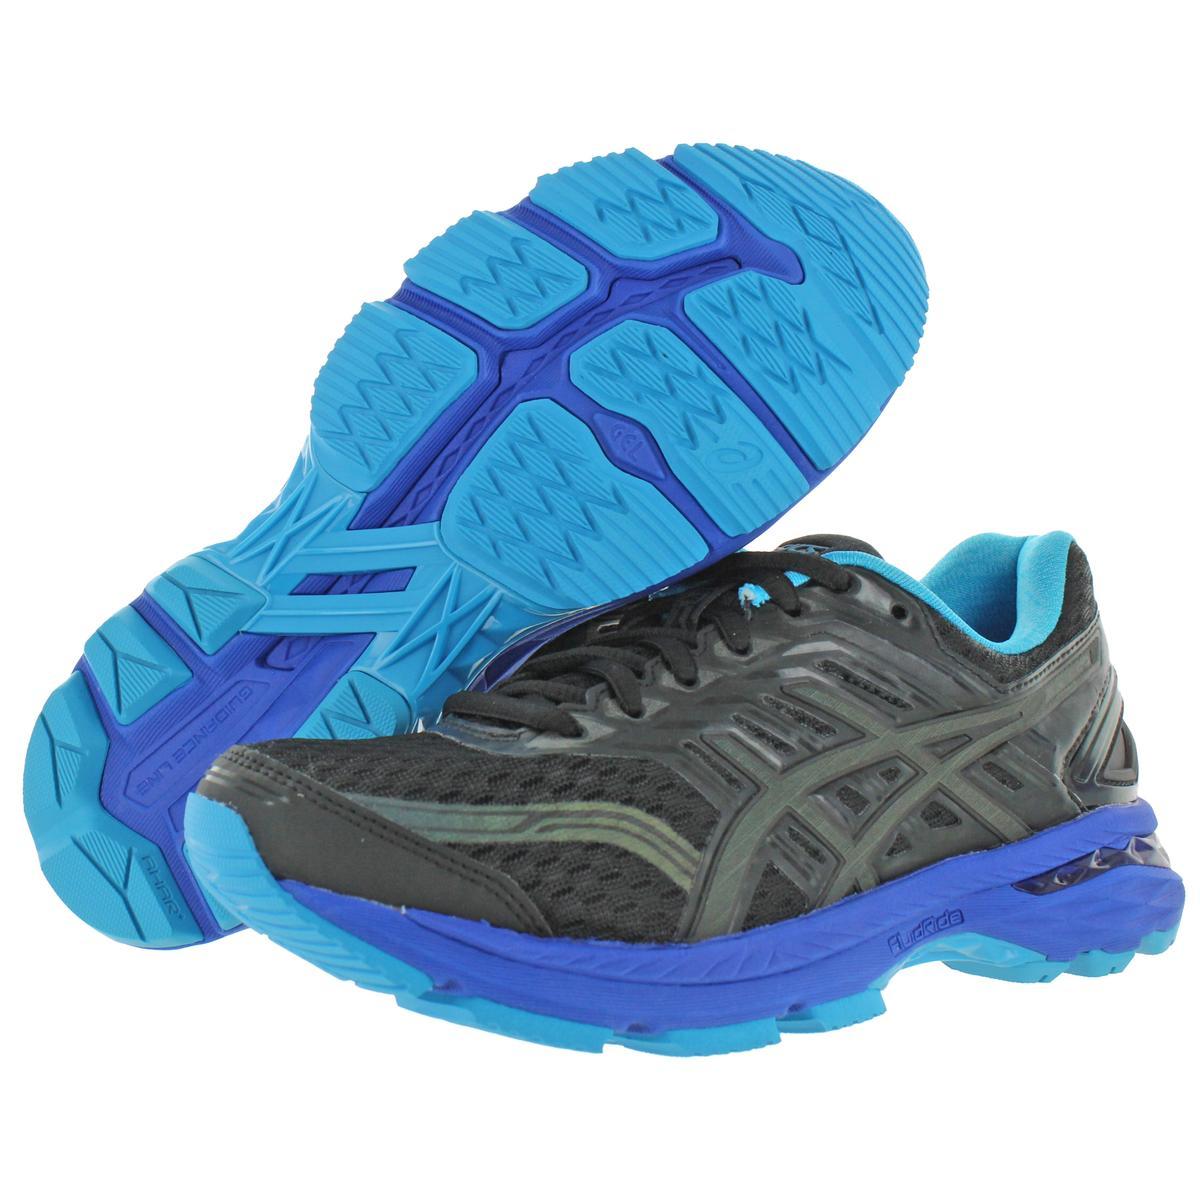 Asics Gt-2000 5 Lite-show Fitness Workout Running Shoes in Blue | Lyst